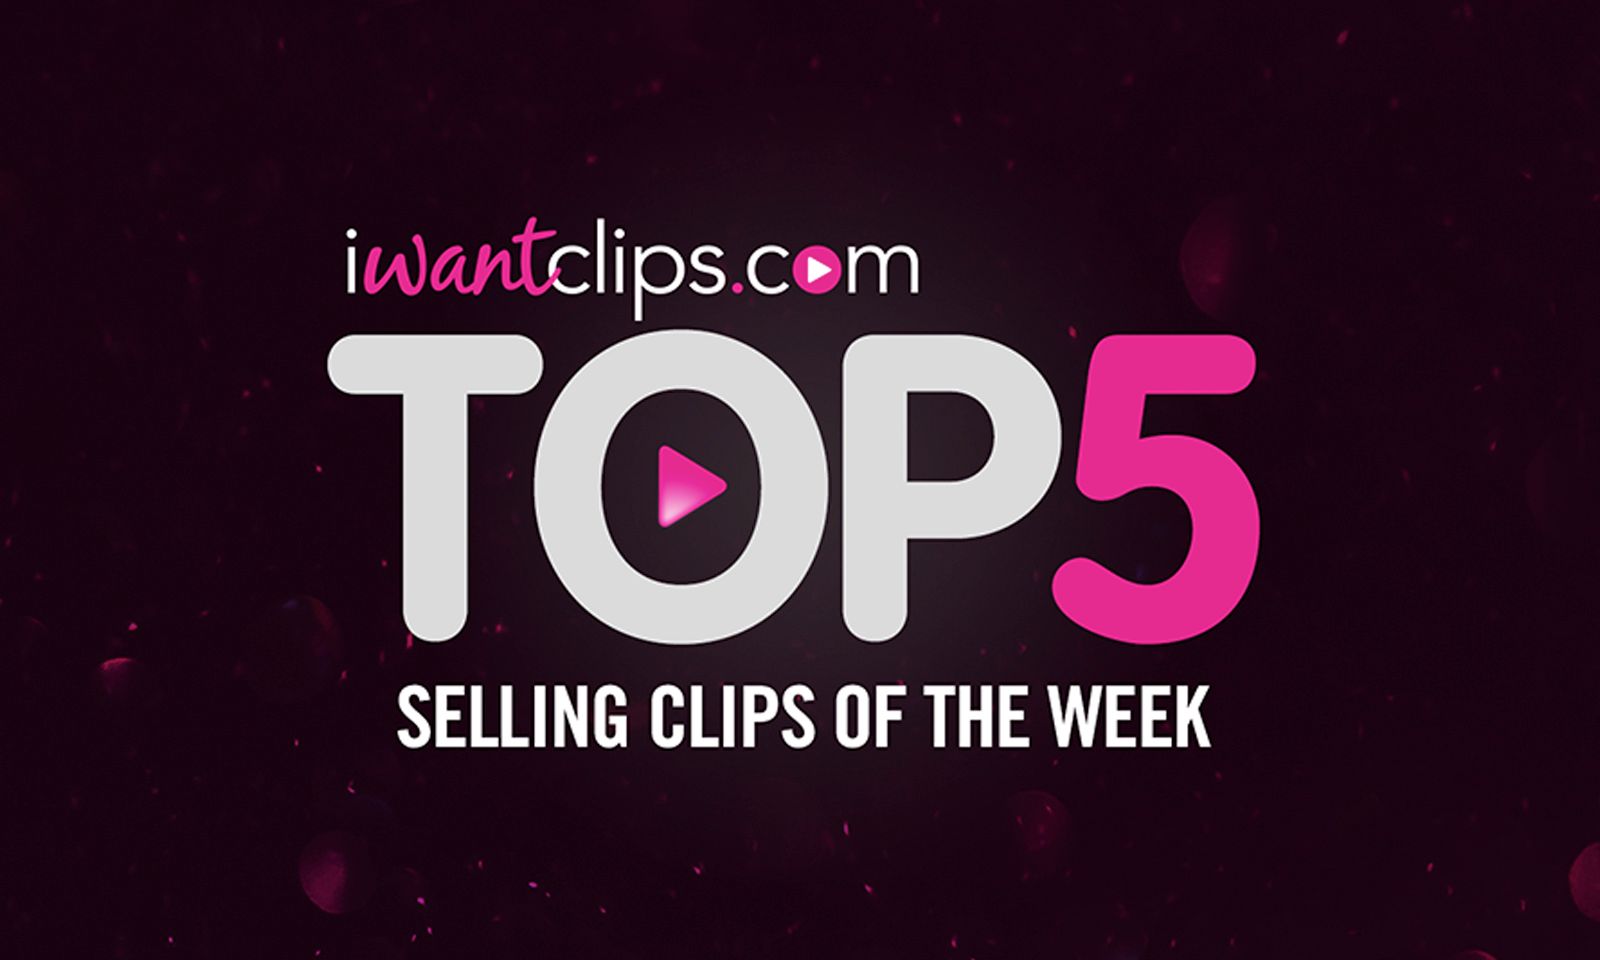 Goddess Worship, Tease Clips in iWantClips’ Top 5 This Week